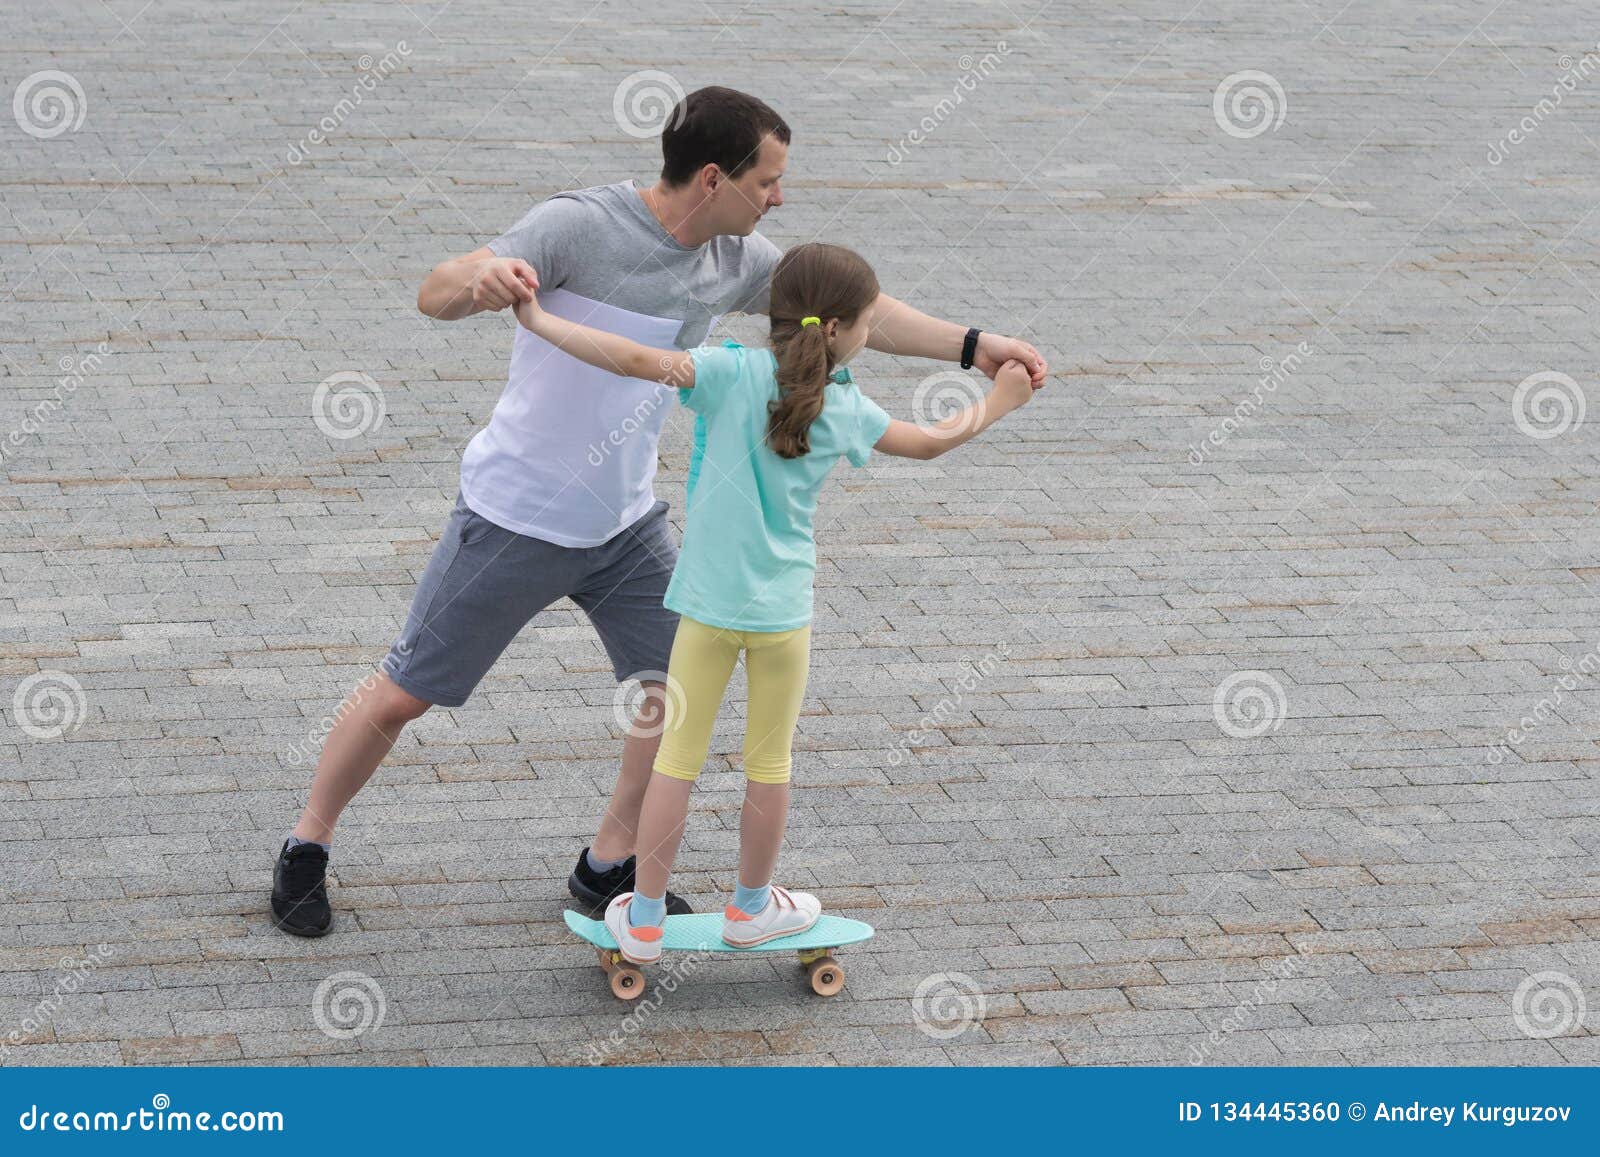 dad teaches daughter to skateboard in a city park